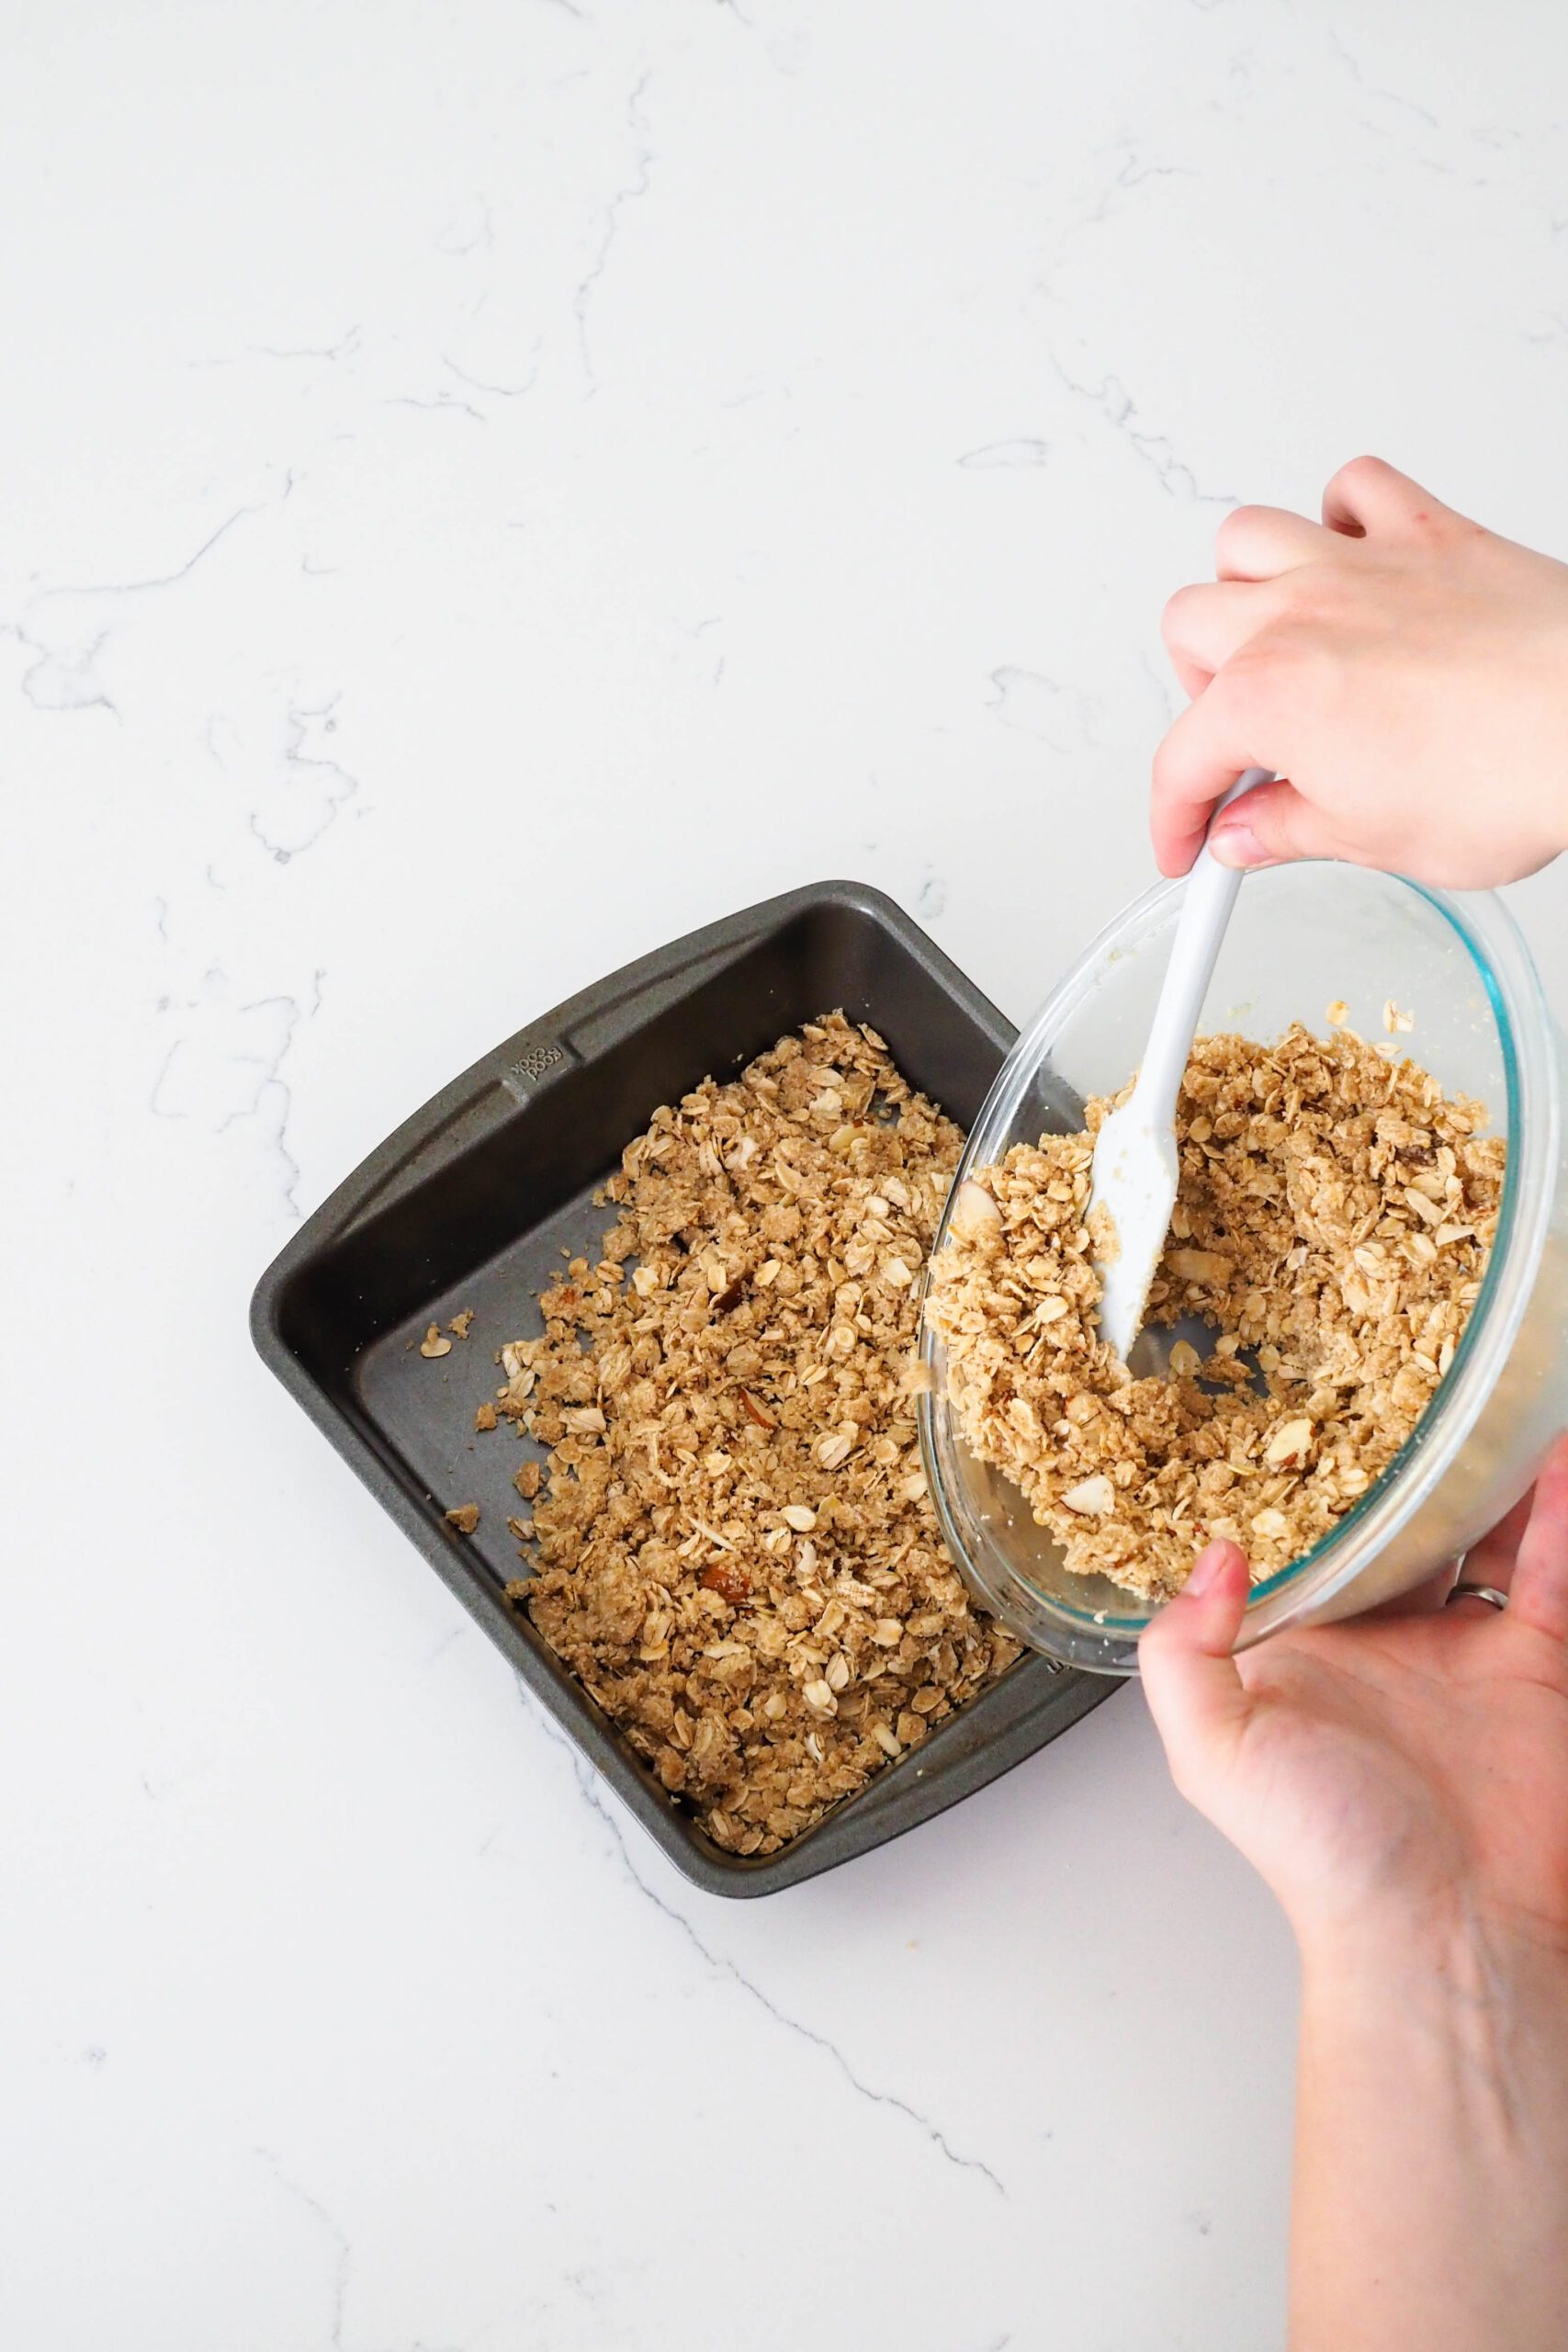 Two hands pour gluten-free crumble crust into a square pan.